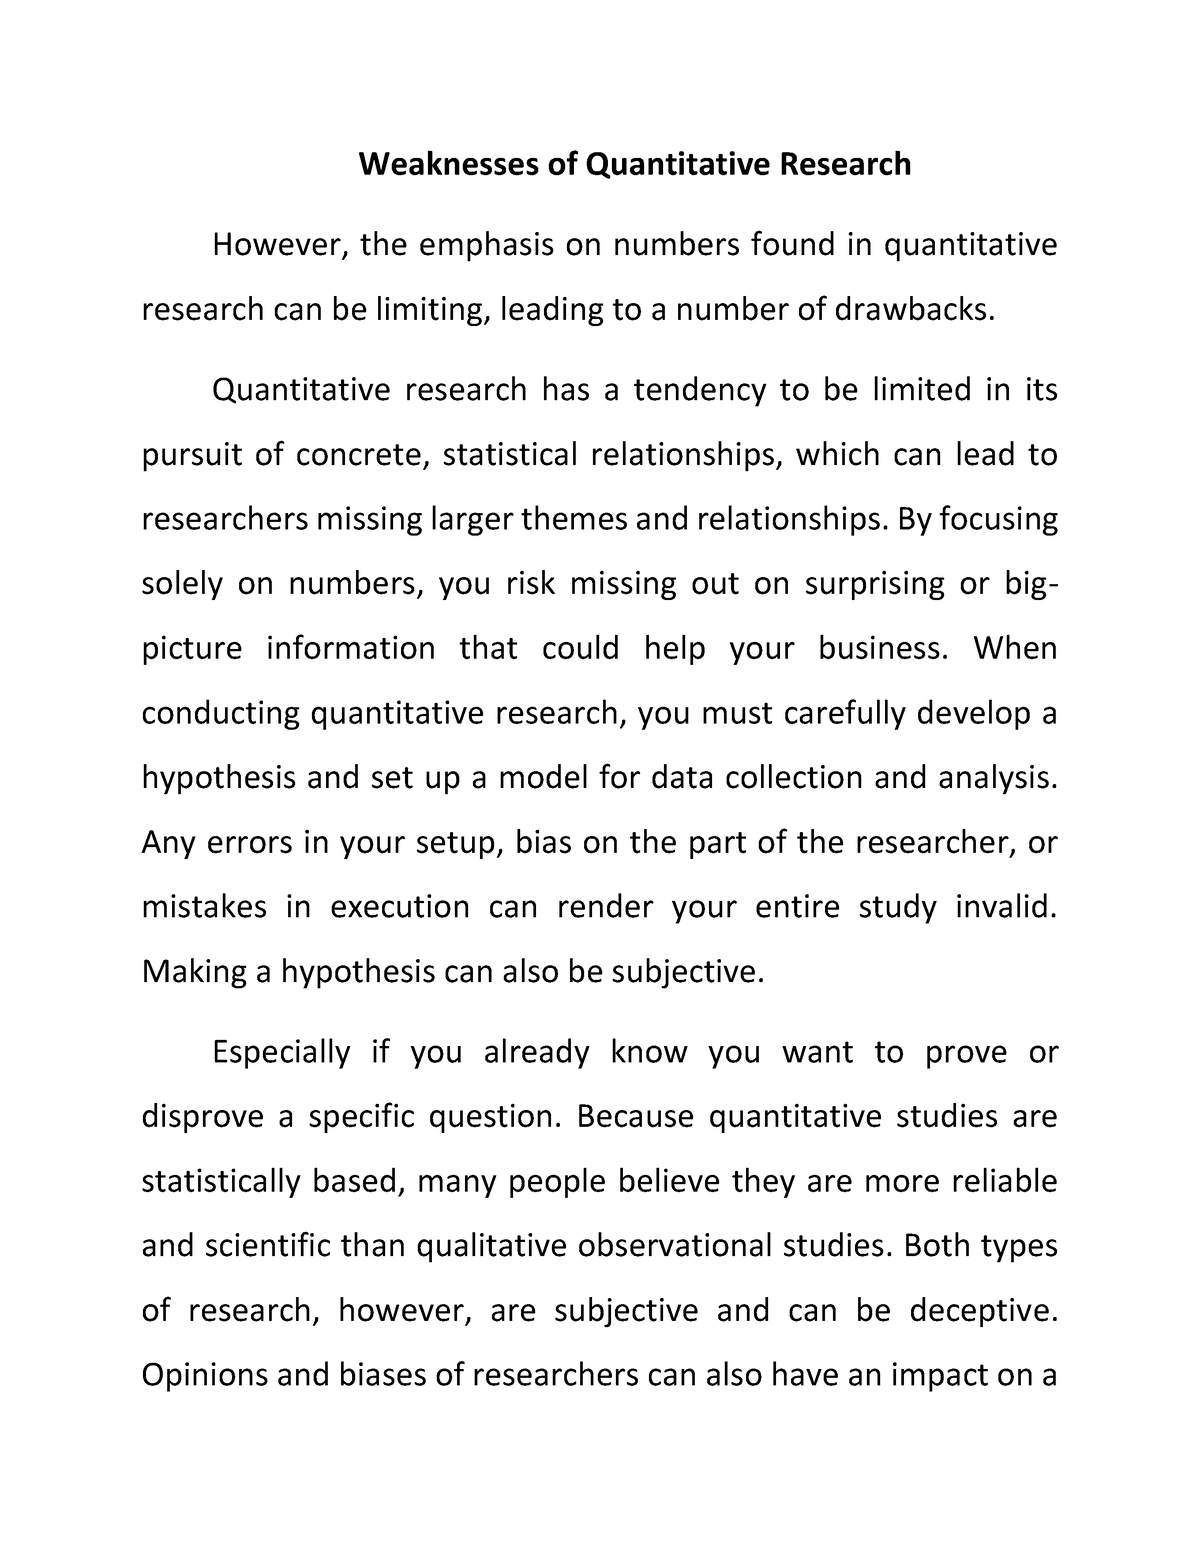 essay about strength and weaknesses of quantitative research